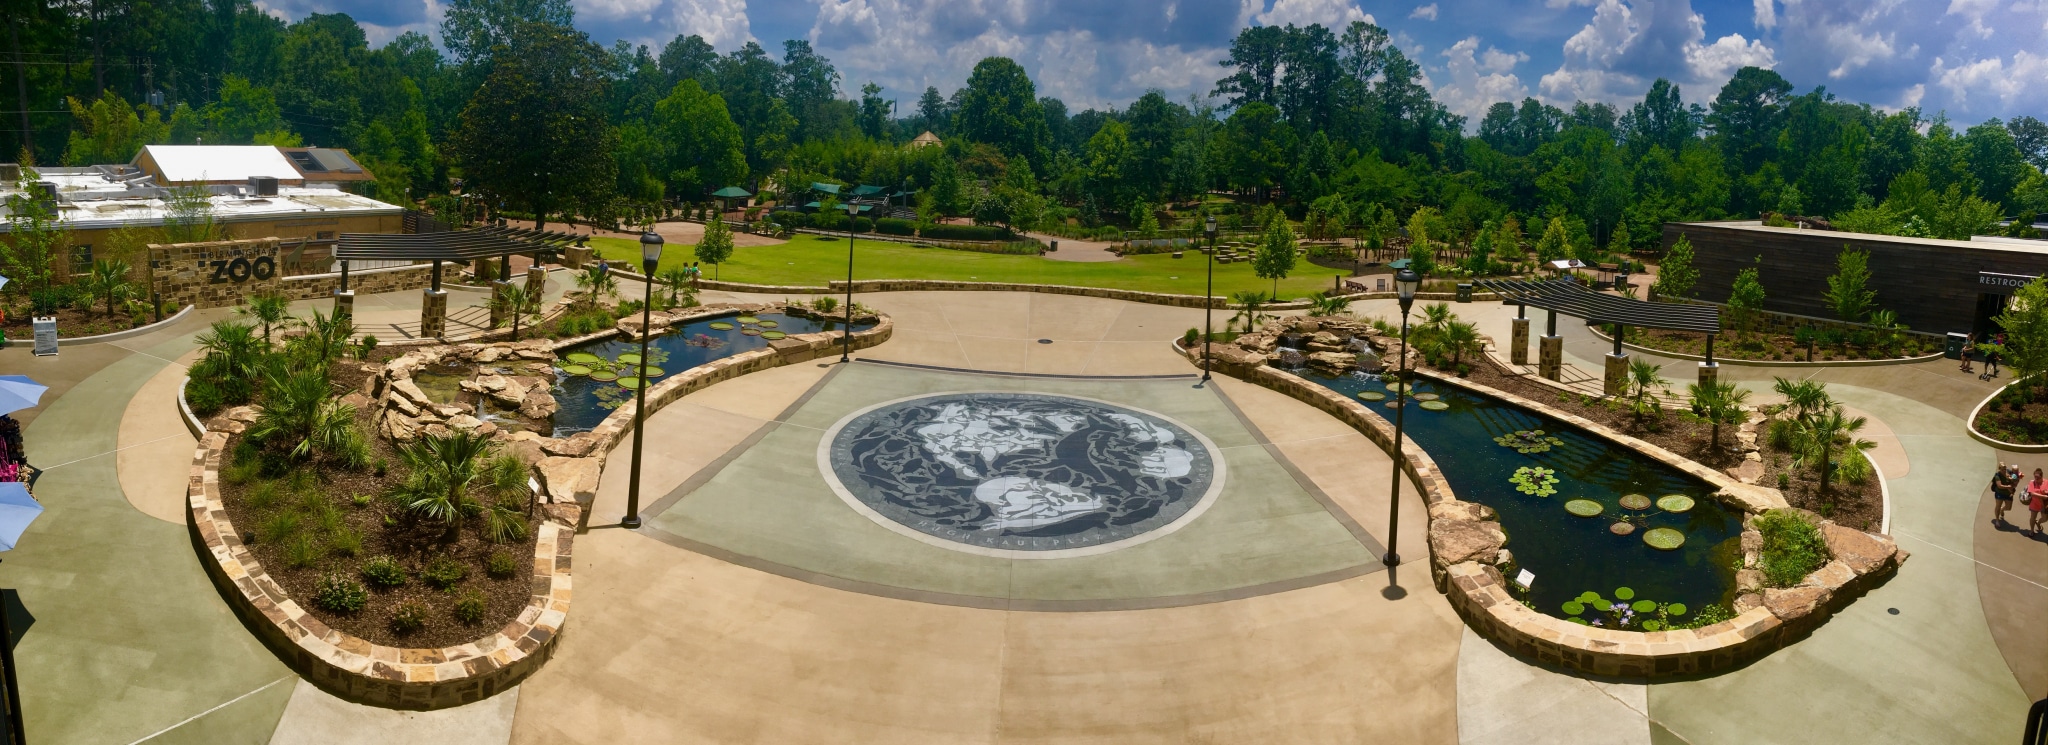 IMG 9374 Now that's a grand entrance! Birmingham Zoo opens new Arrival Experience and Welcome Plaza (Photos)